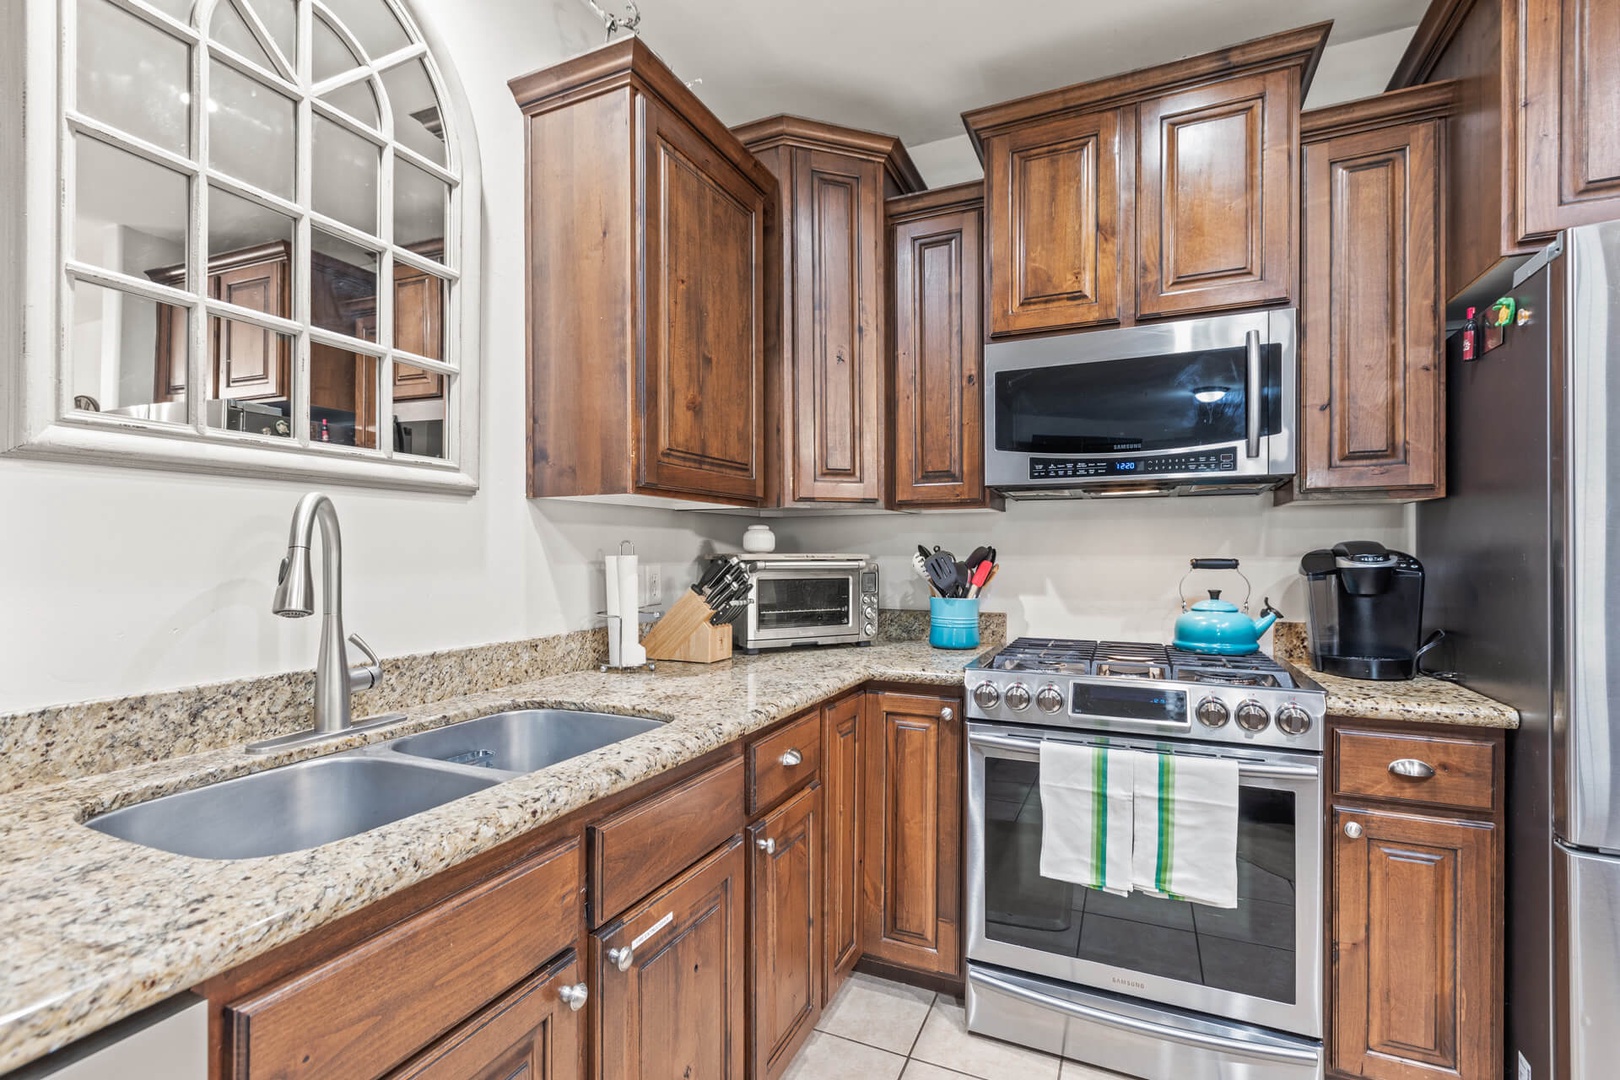 Bear Hollow Lodges 4203: Gleaming granite countertops with tons of workspace, fully equipped with large modern appliances and ample supply of utensils for convenient stay-in meal preparation.